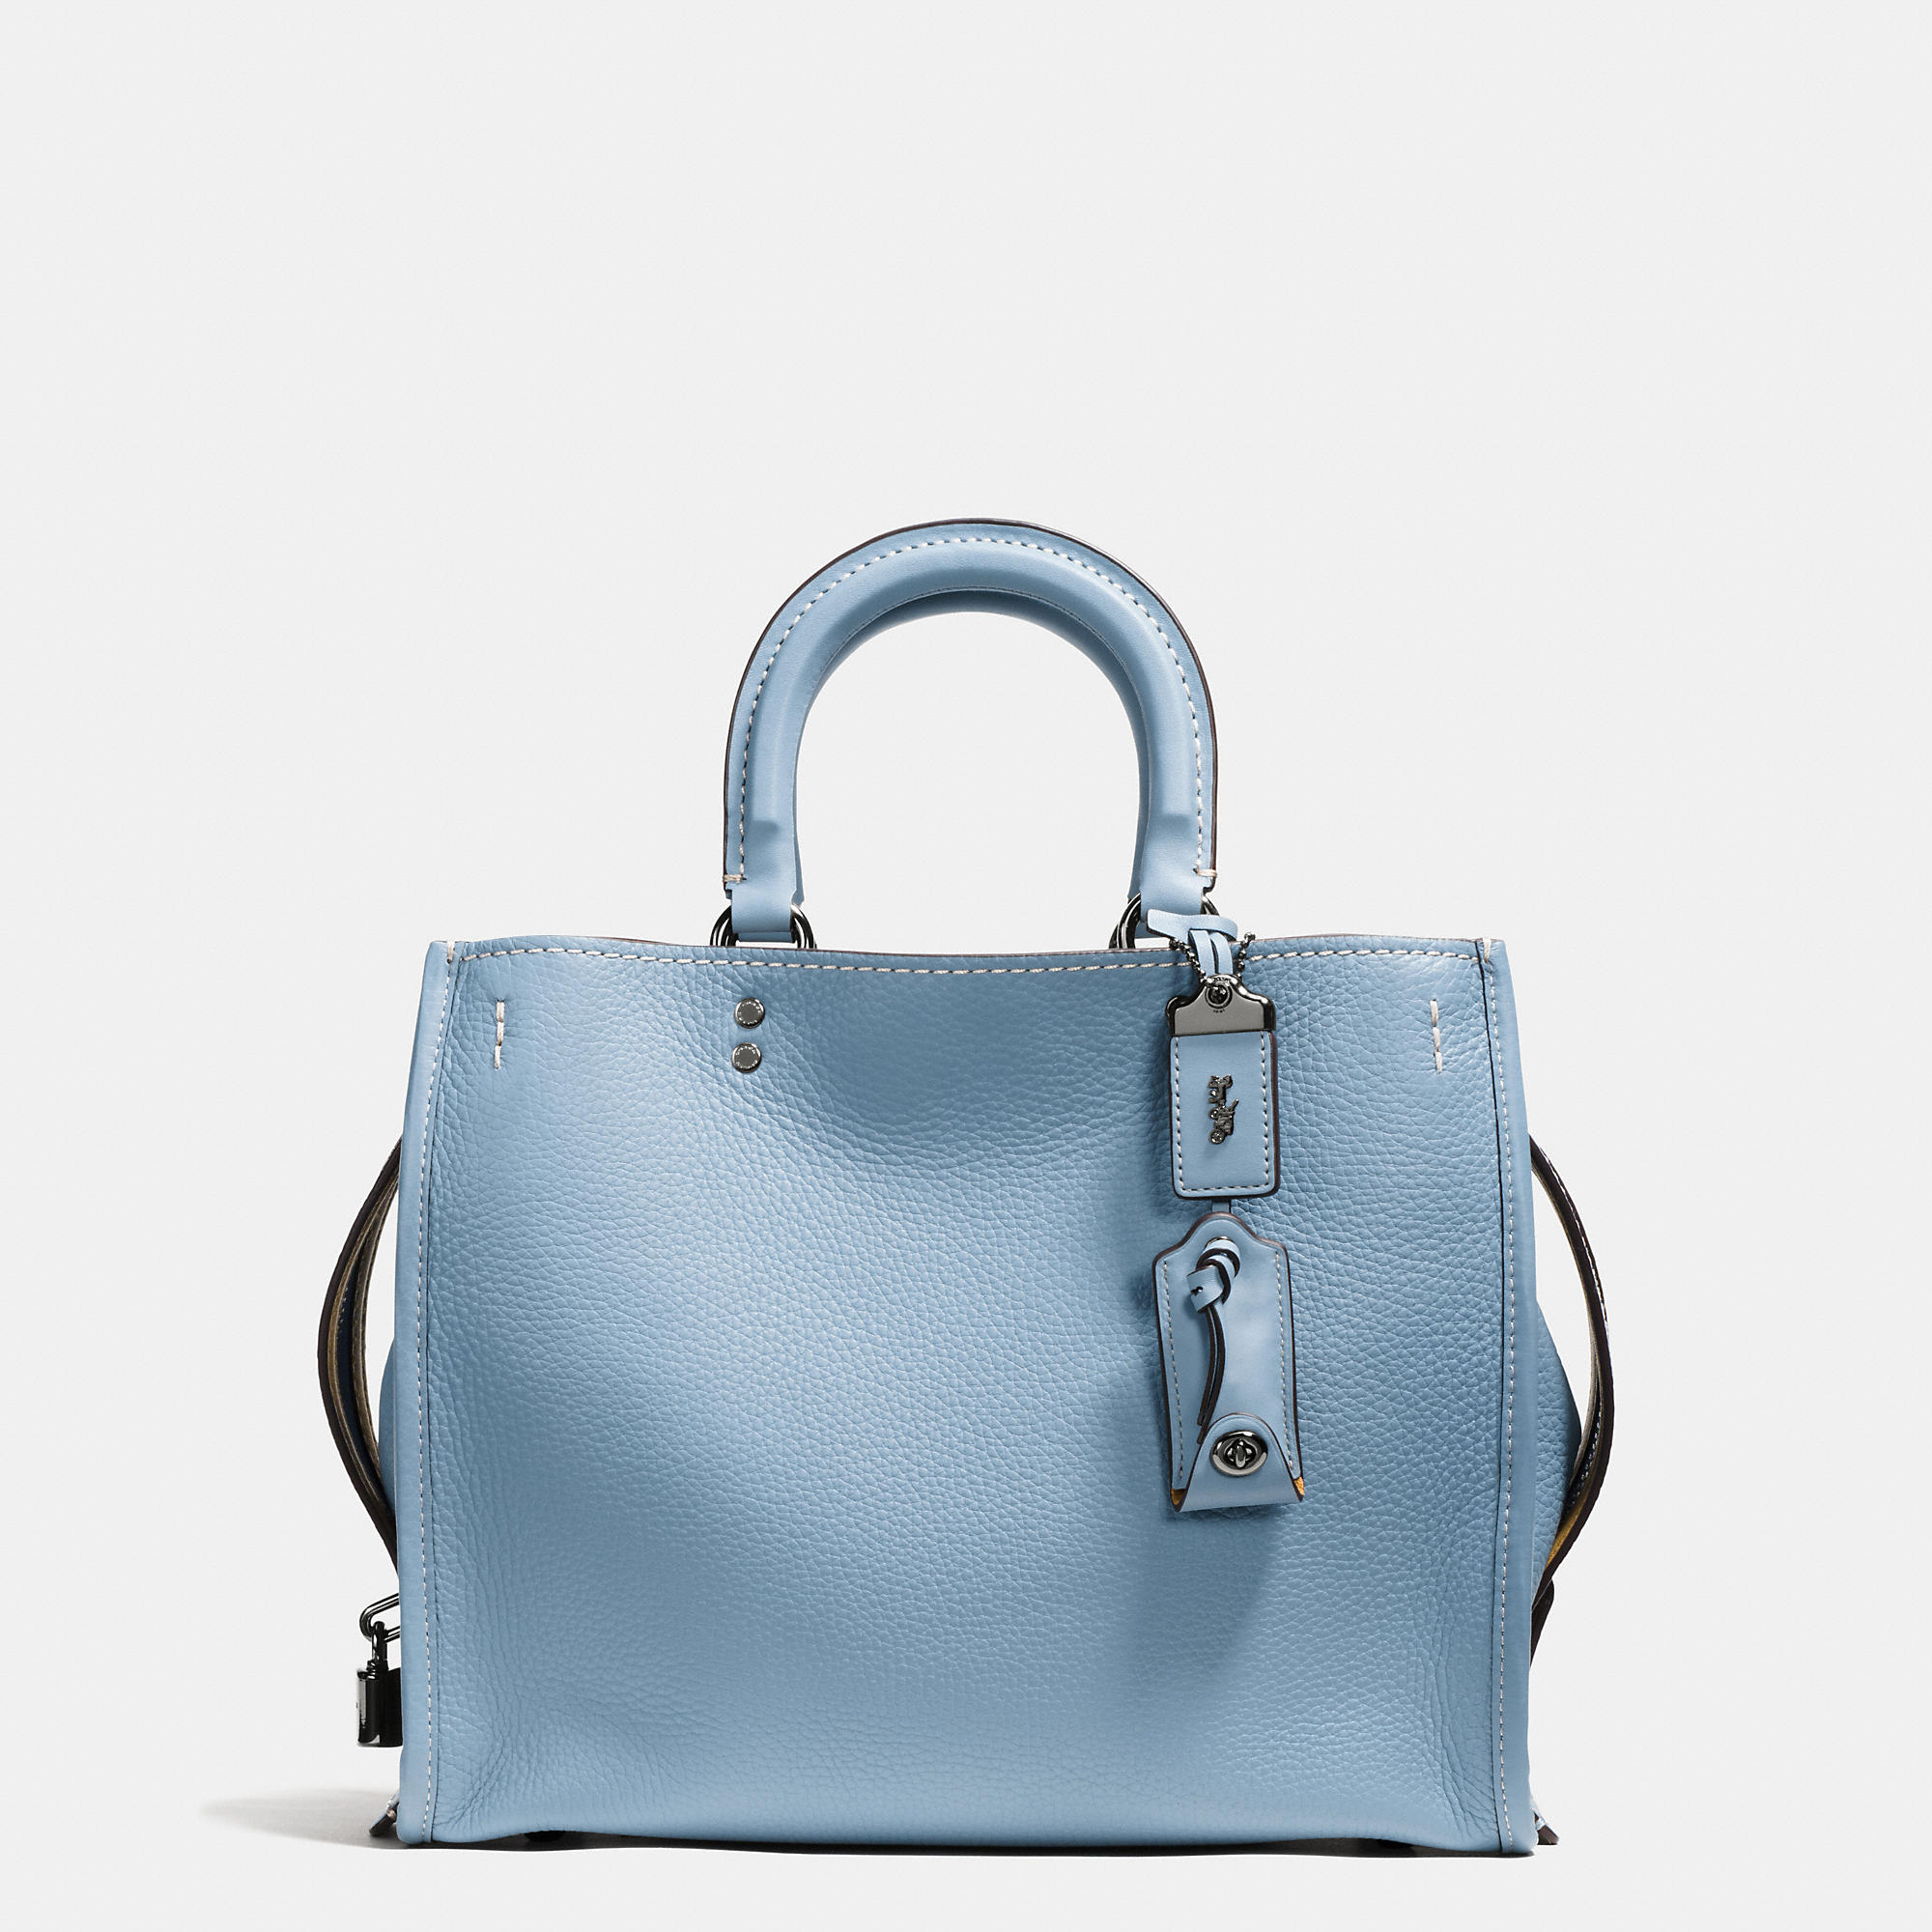 2016 New Fashion Coach Rogue Bag In Glovetanned Pebble Leather